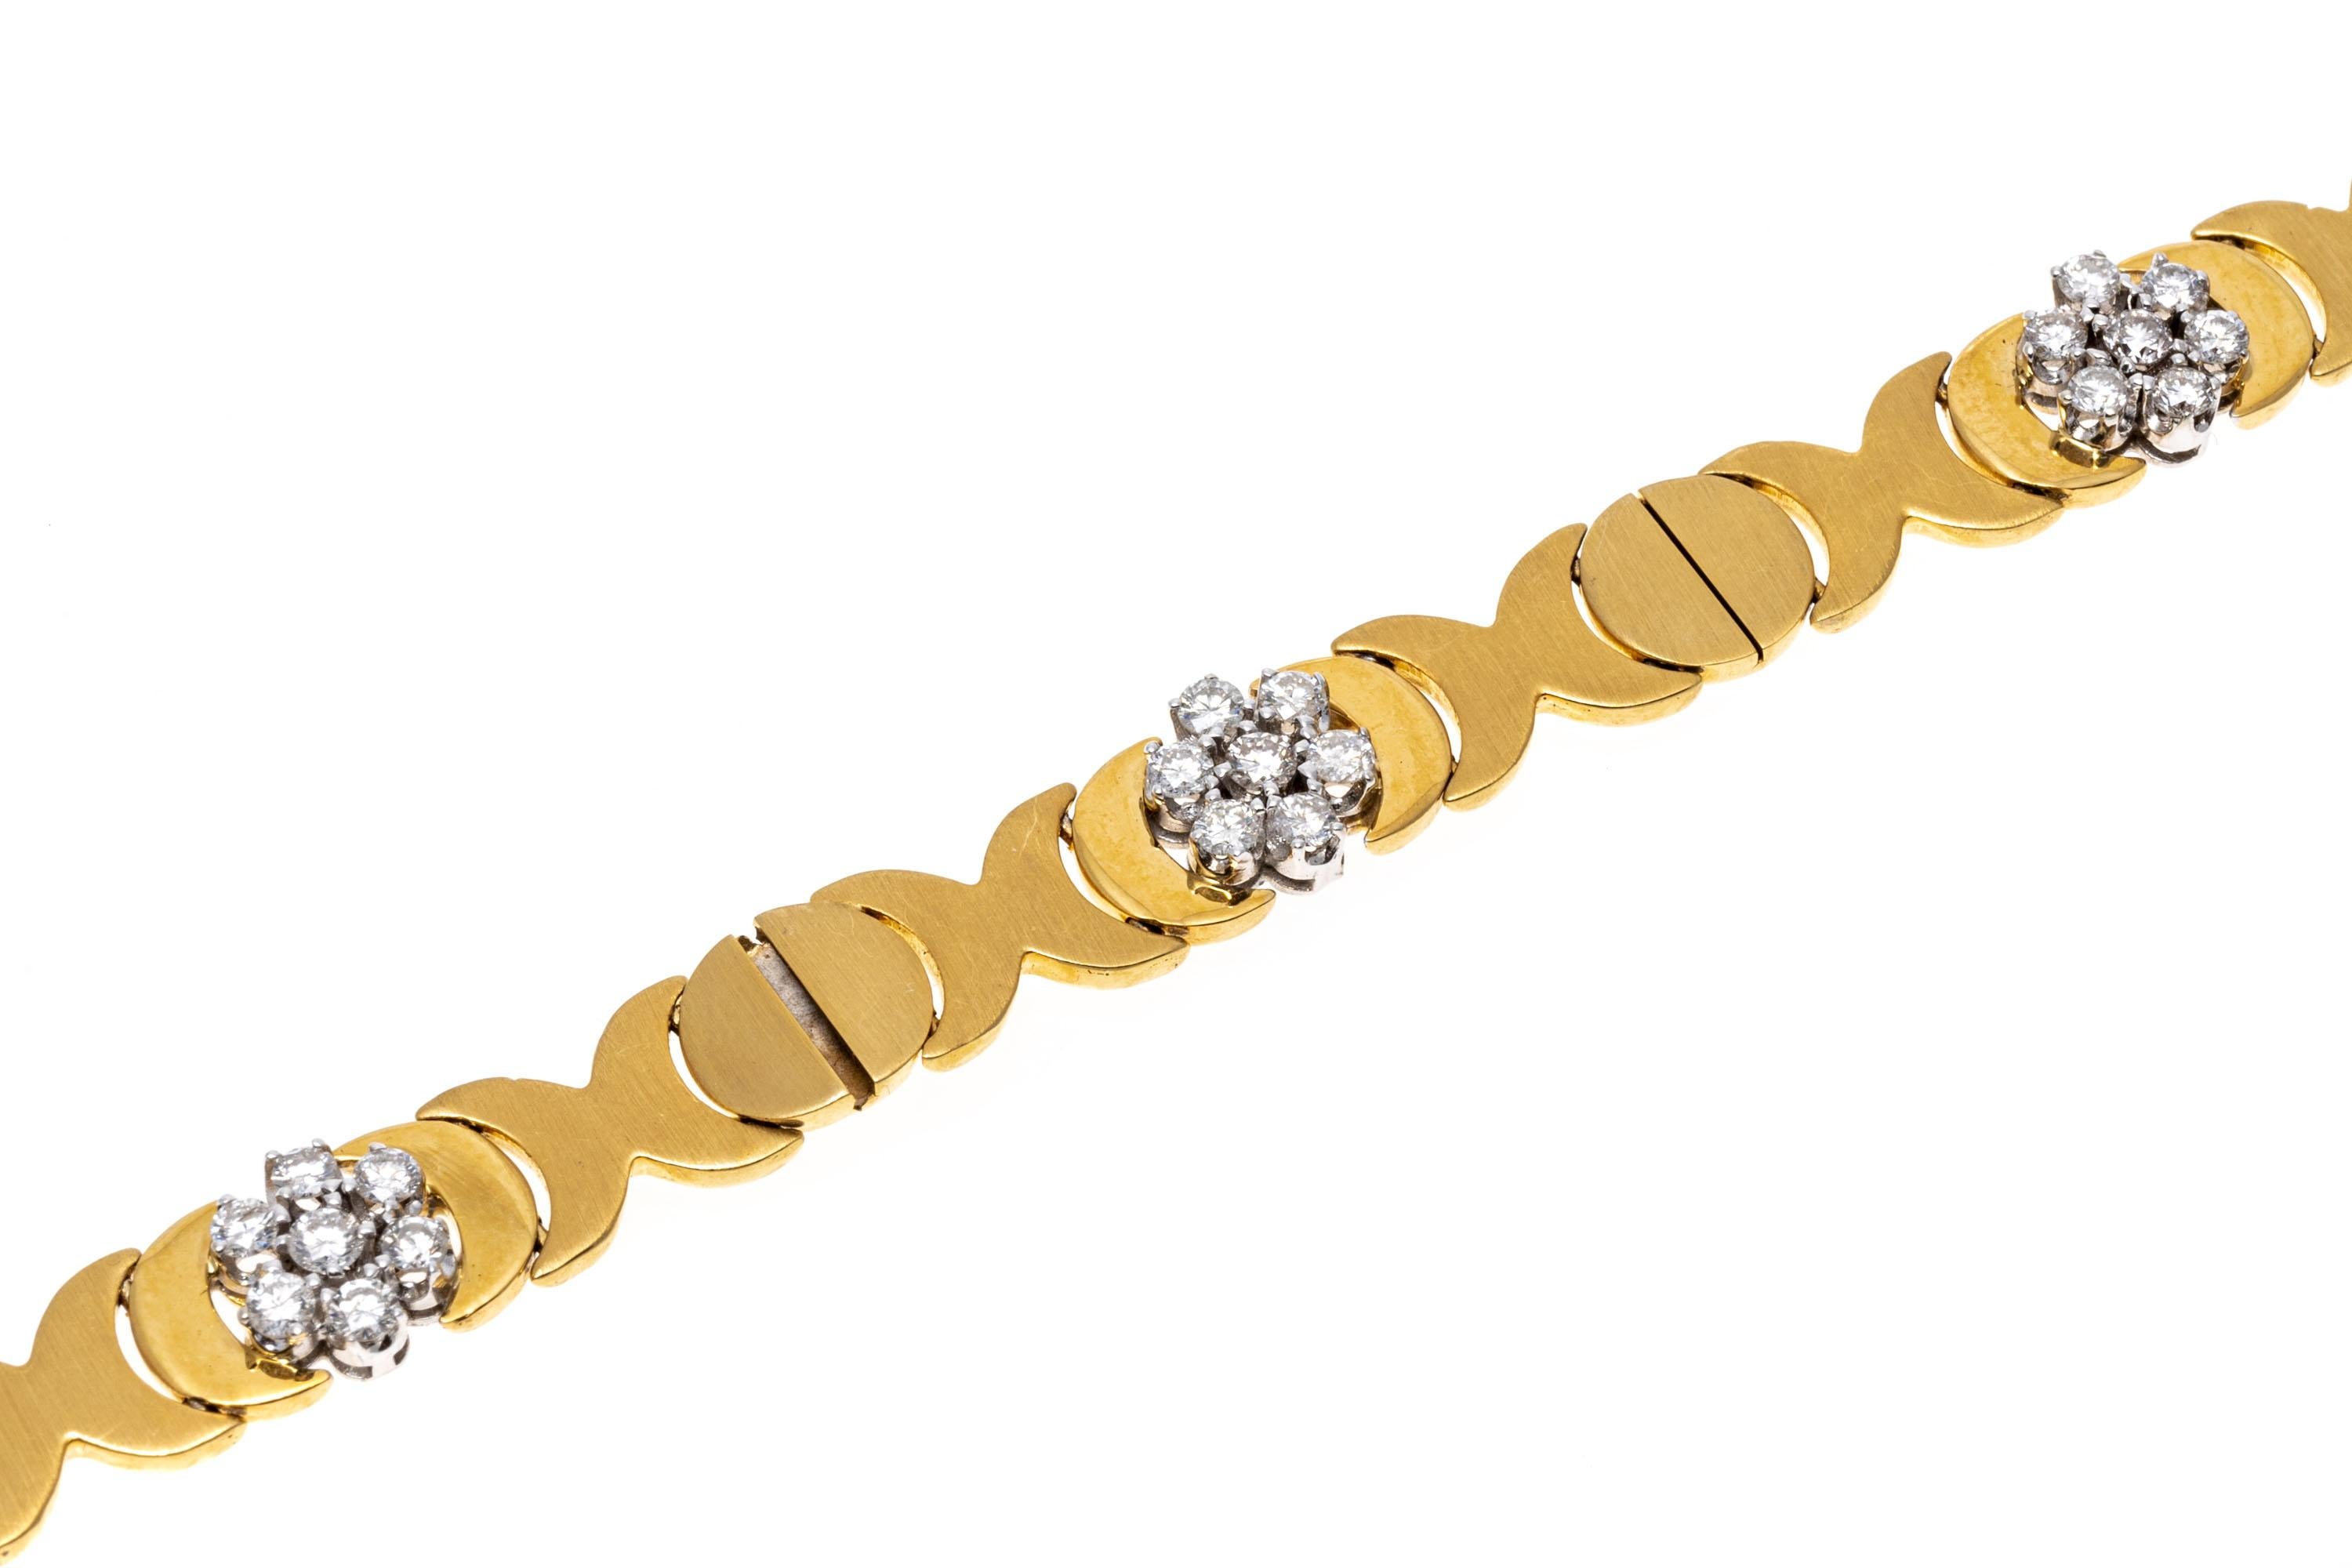 14k yellow gold bracelet. This classic bracelet is a brushed and polished 